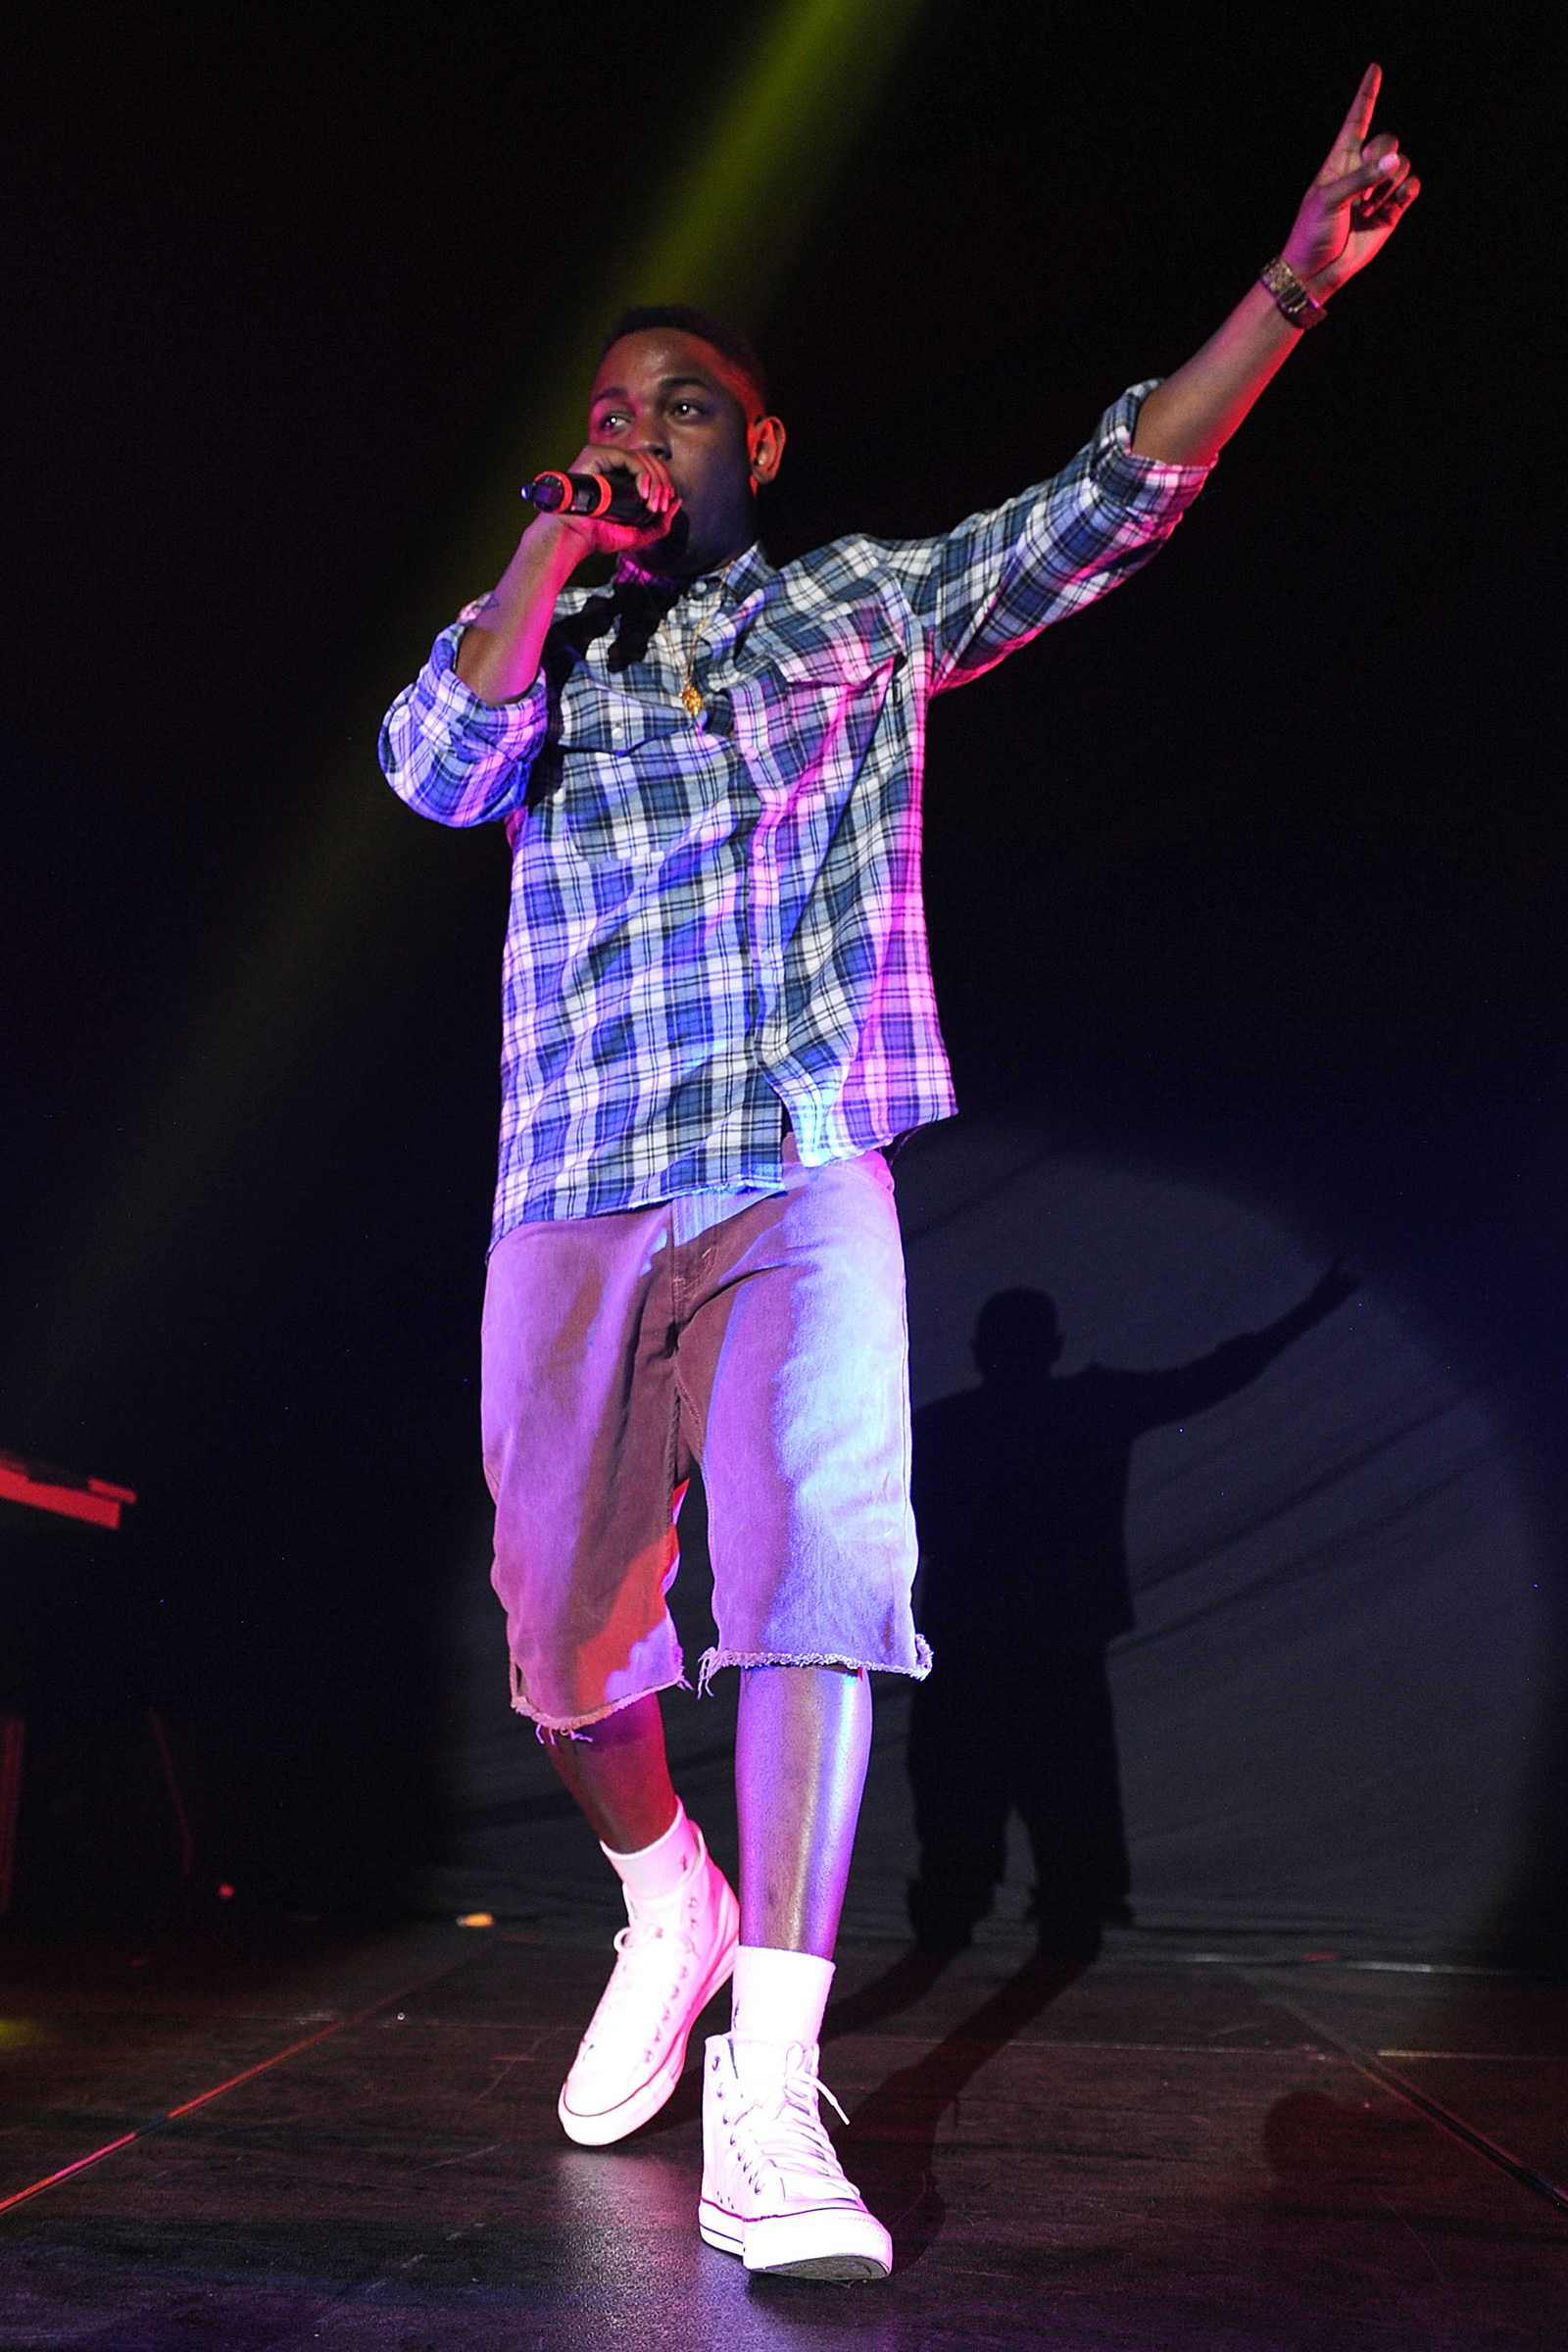 Rapper Kendrick Lamar performs at San Jose State Event Center on March 10, 2012 in San Jose, California.